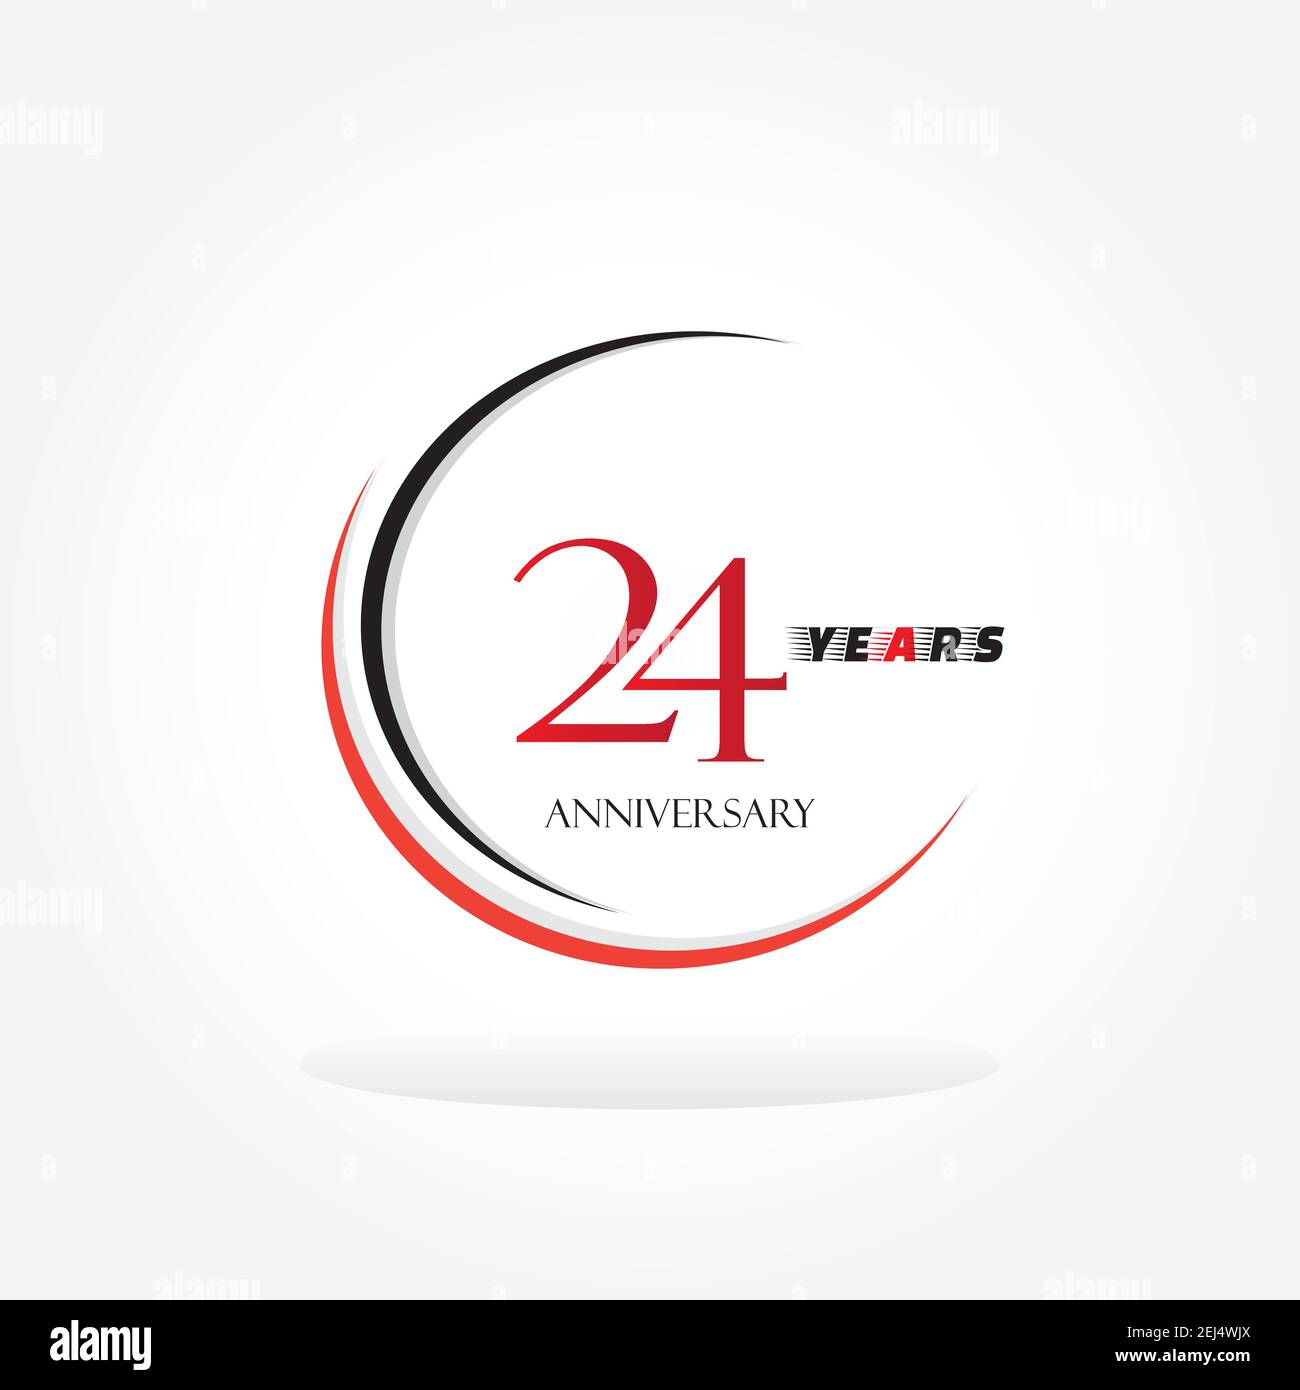 21 years anniversary linked logotype with red color isolated on white background for company celebration event Stock Vector